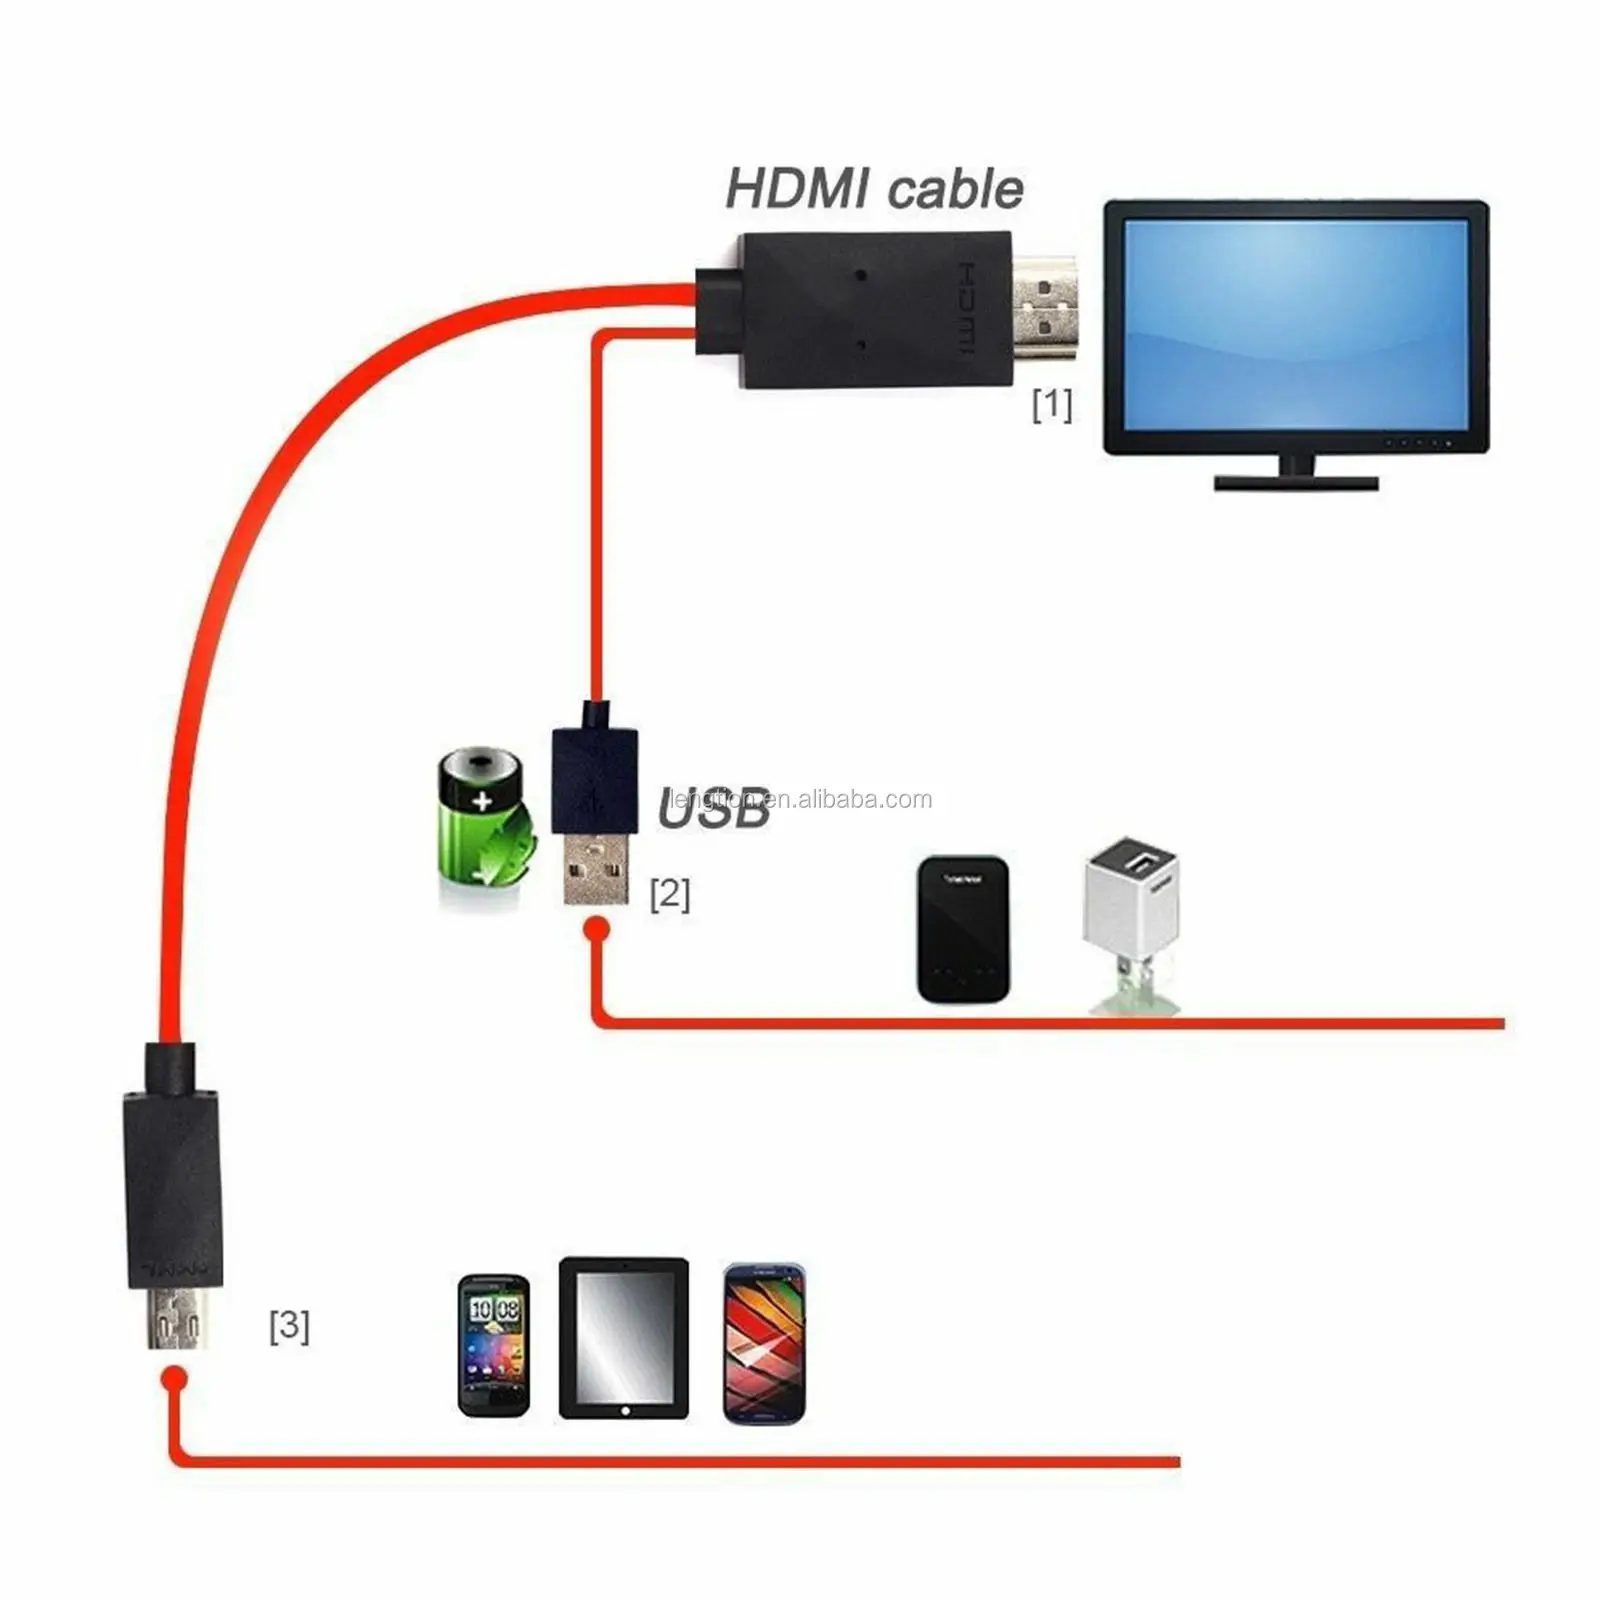 element symaskine Håndskrift Source 2M MHL USB to HDMI HD TV Cable For Samsung Galaxy S5 S4 S3 Note2/3  Tab3 8.0/10.0 on m.alibaba.com